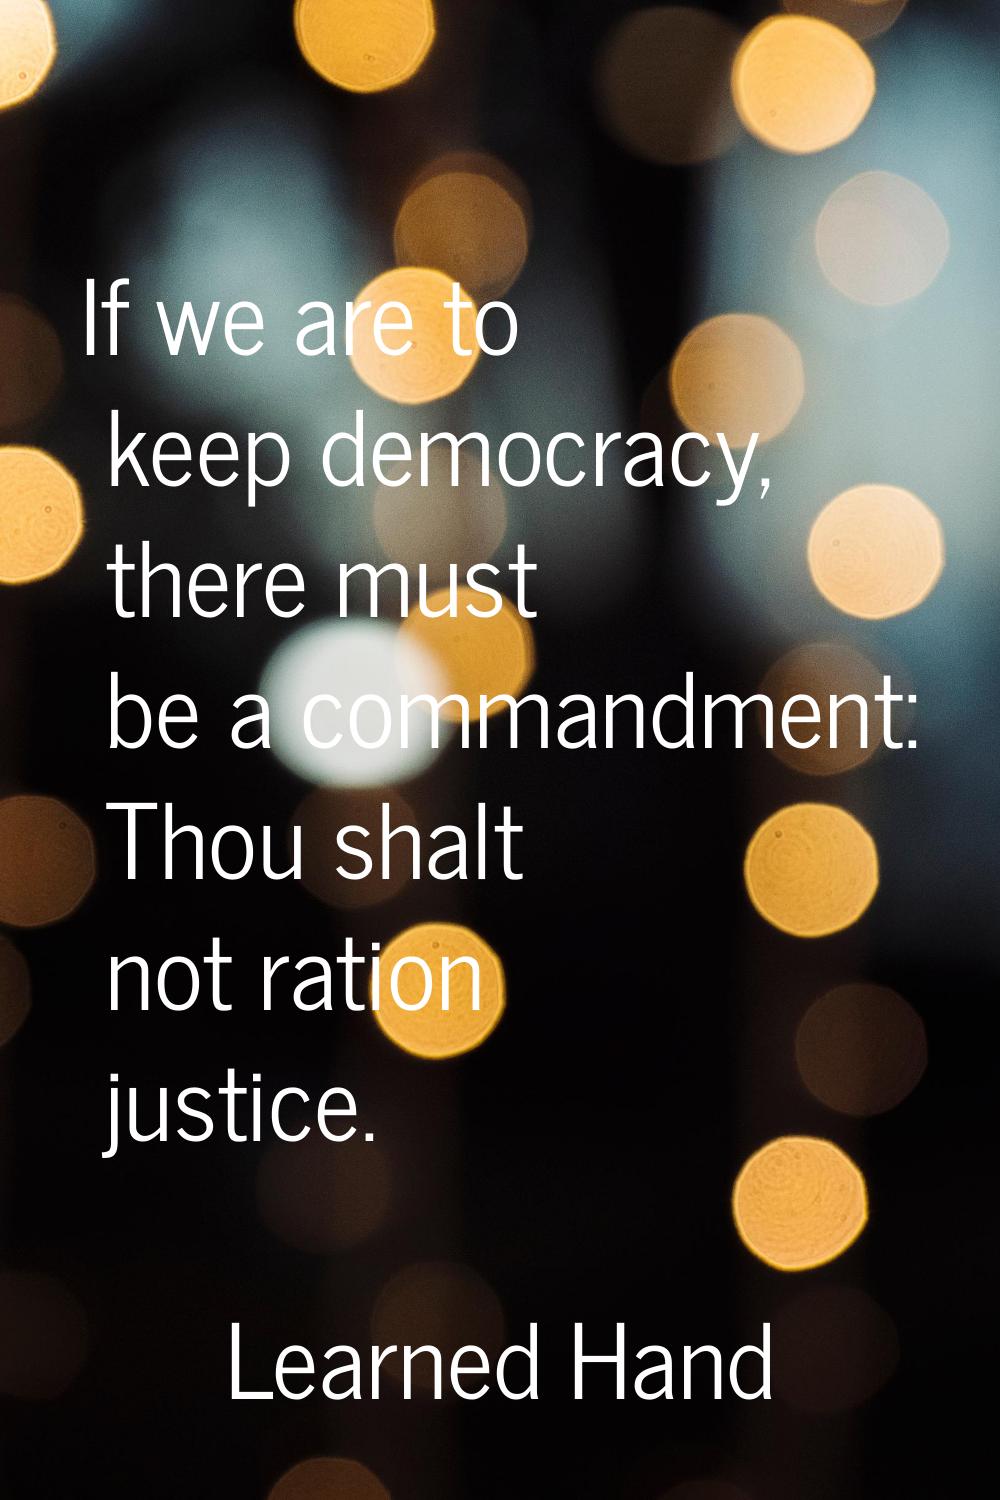 If we are to keep democracy, there must be a commandment: Thou shalt not ration justice.